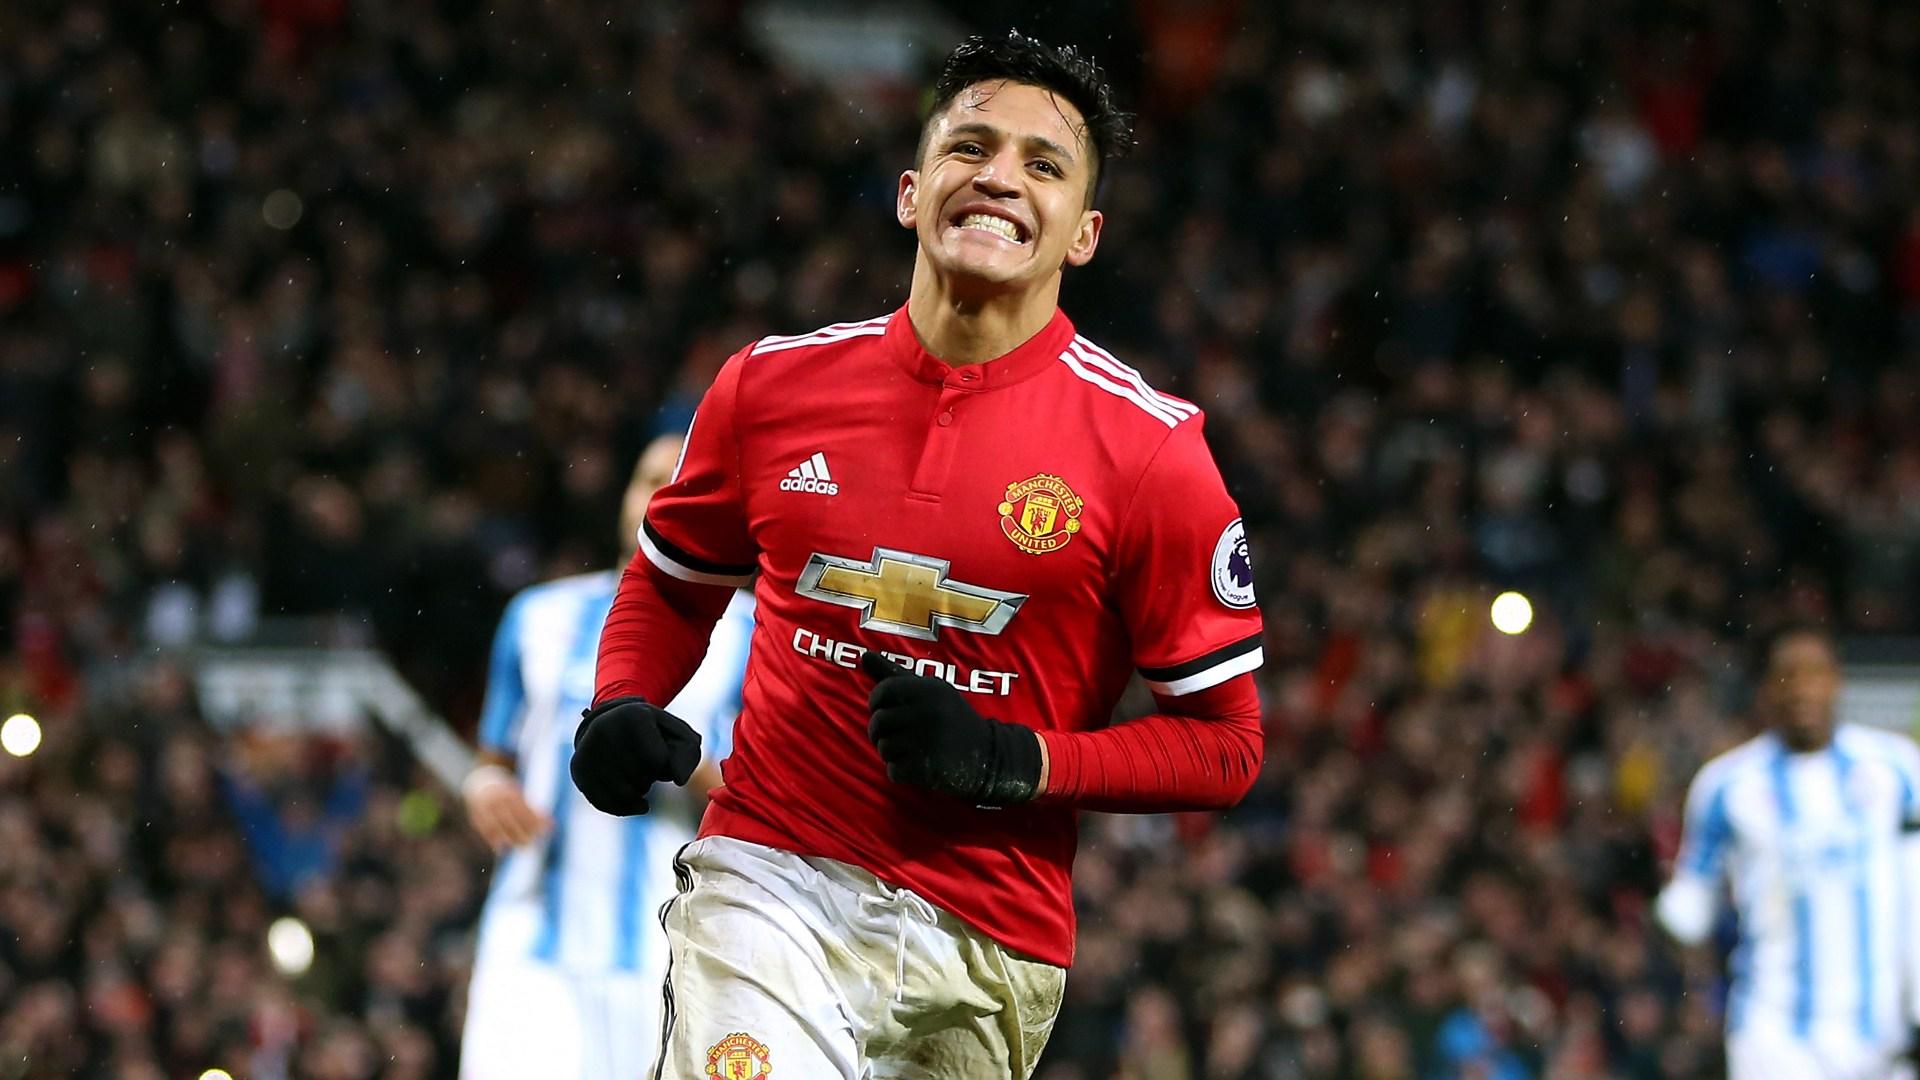 What is Alexis Sanchez's net worth and how much does the Man Utd